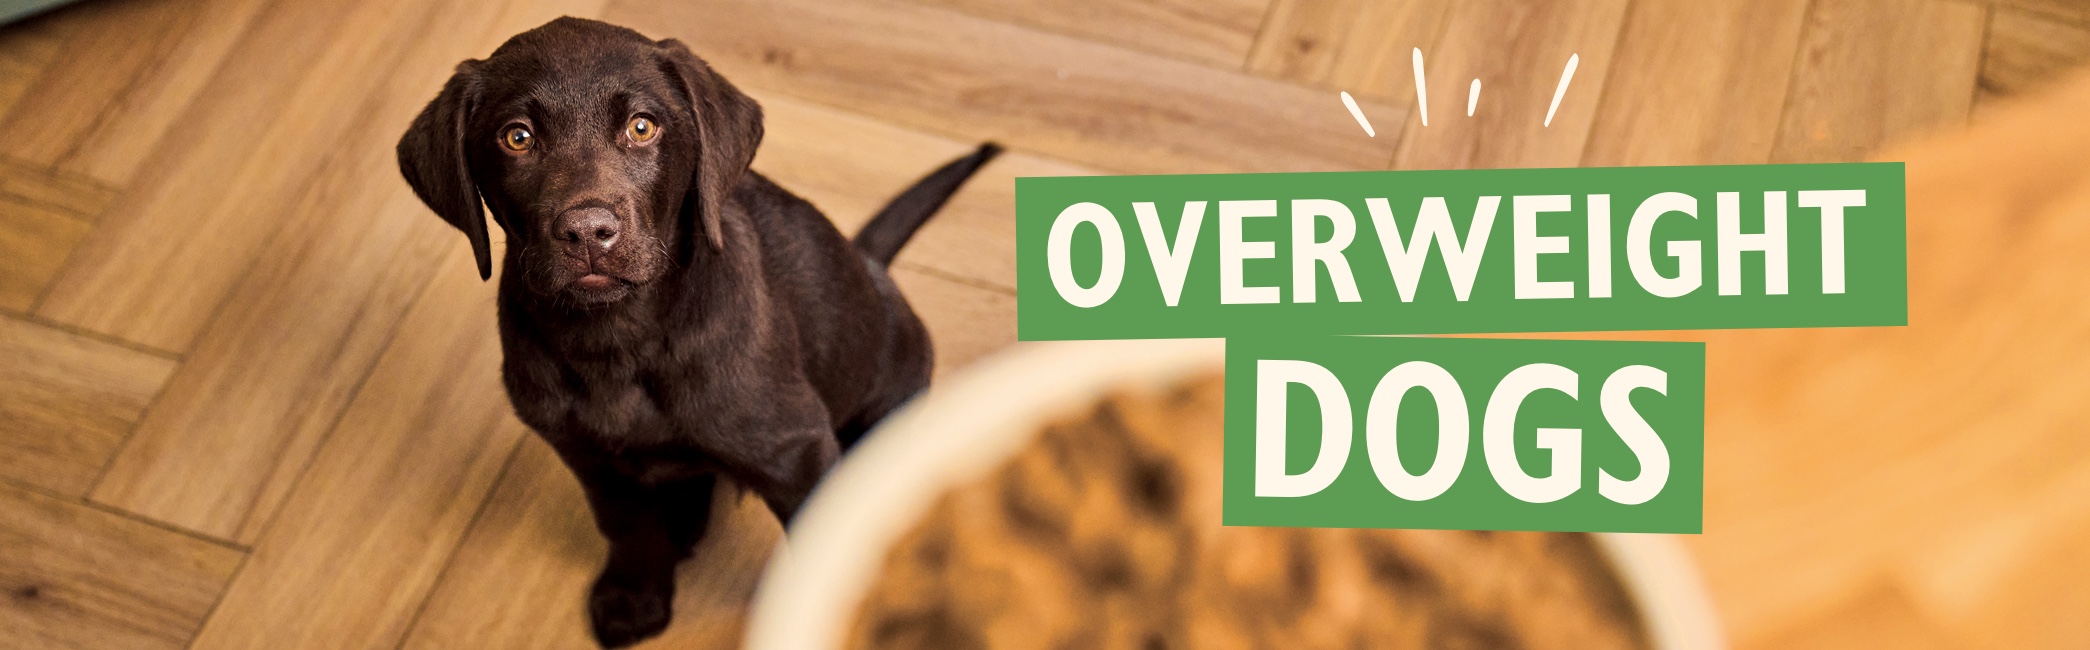 Overweight dogs: The ideal weight for your dog